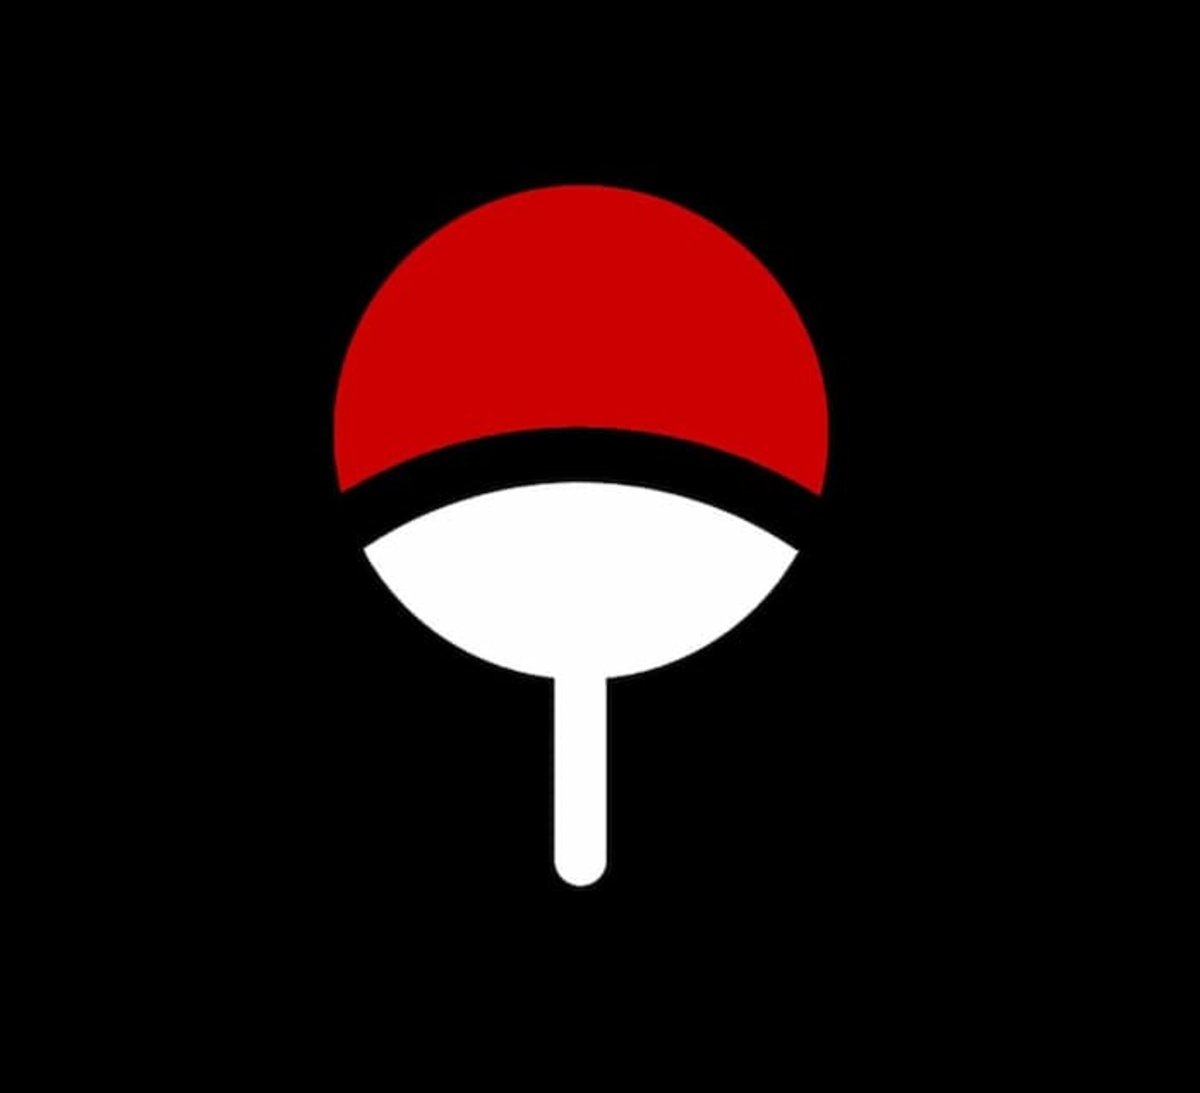 The logo of the famous Uchiha Clan